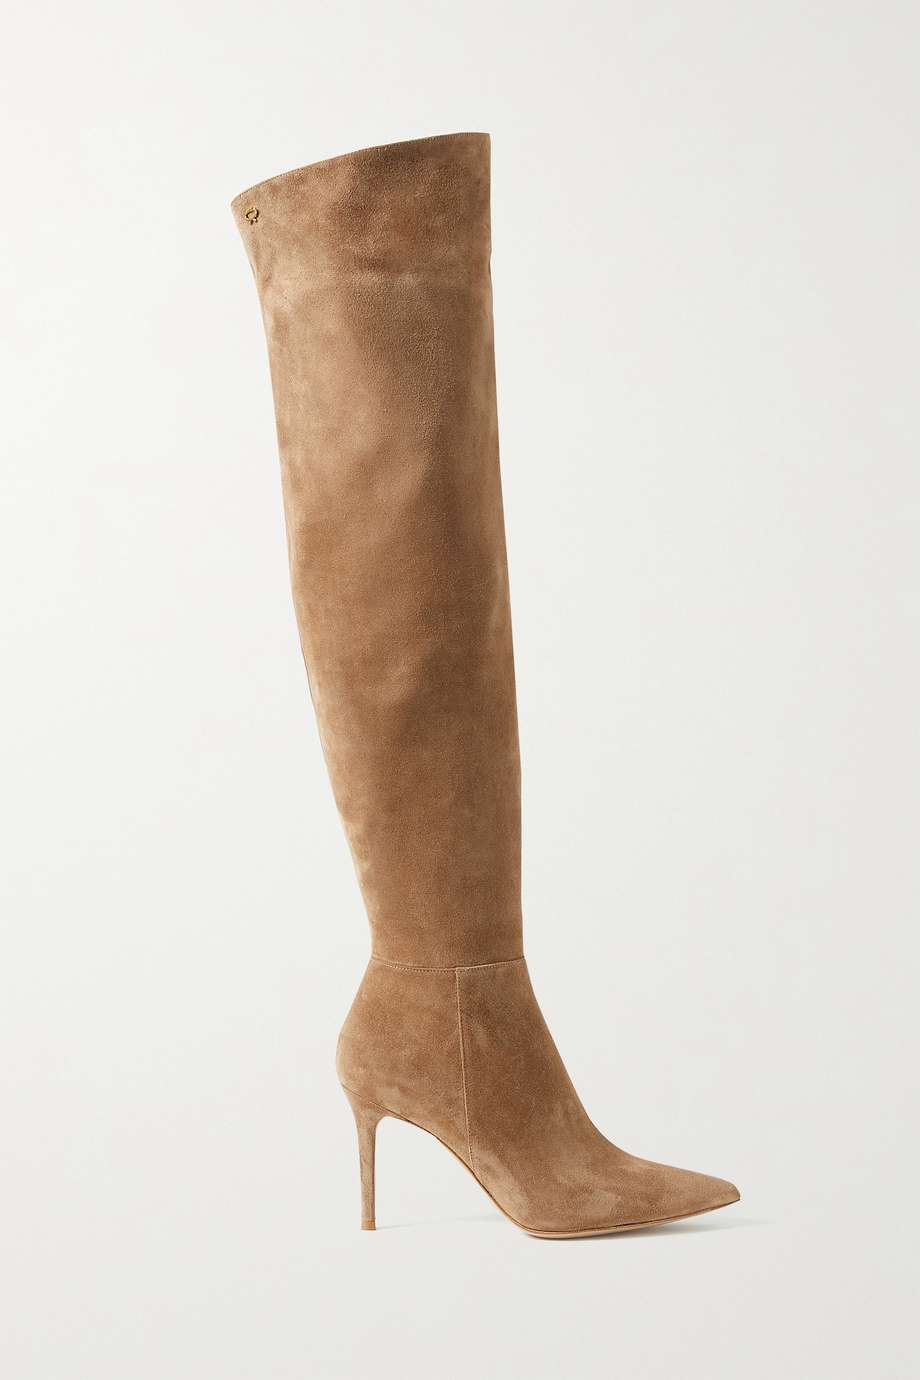 Gianvito Rossi 85 Suede Over-The-Knee Boots